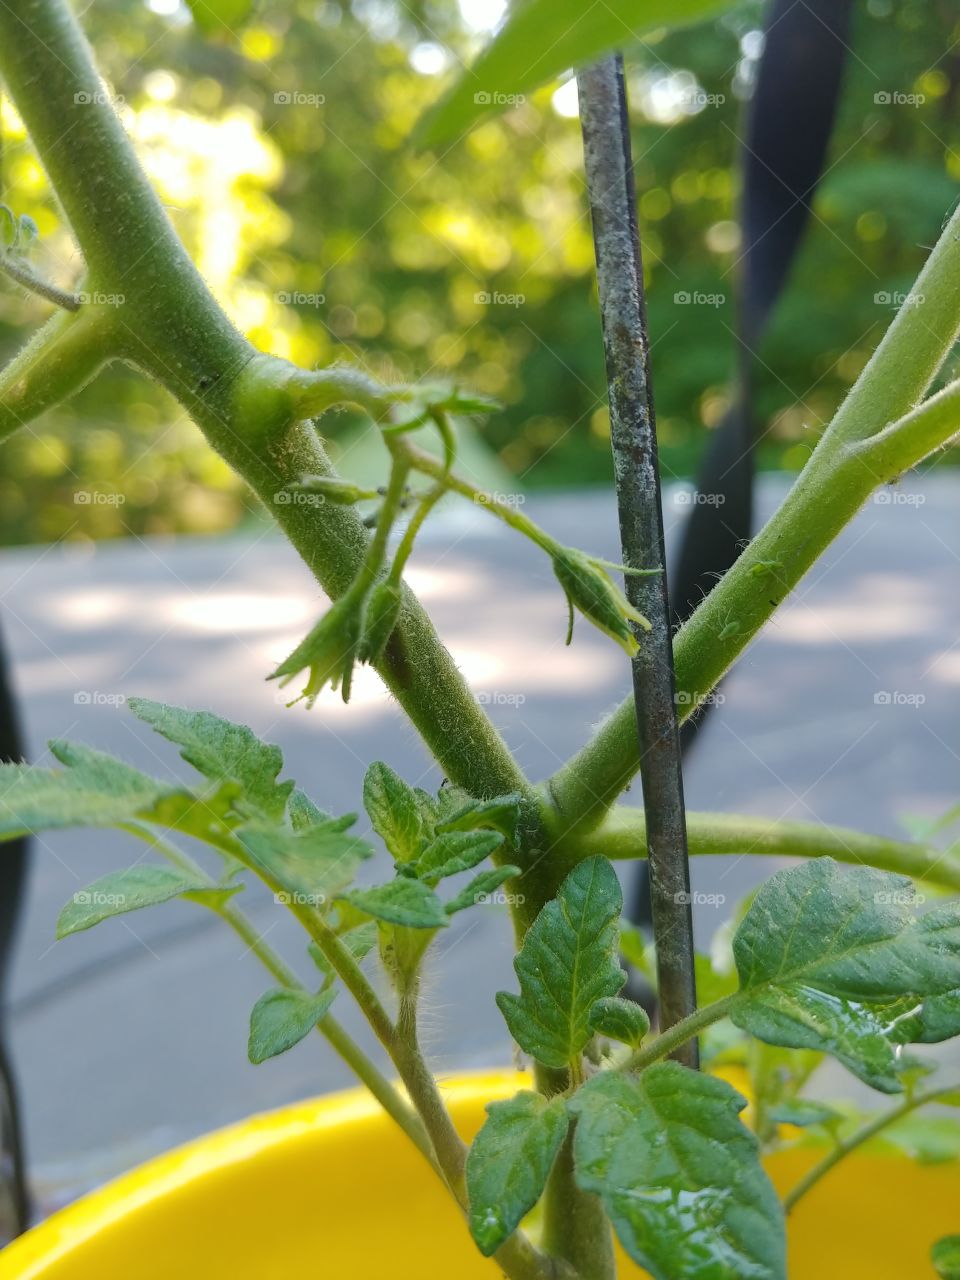 these are the lower branches of the tomato plant ive got growing on my back porch.